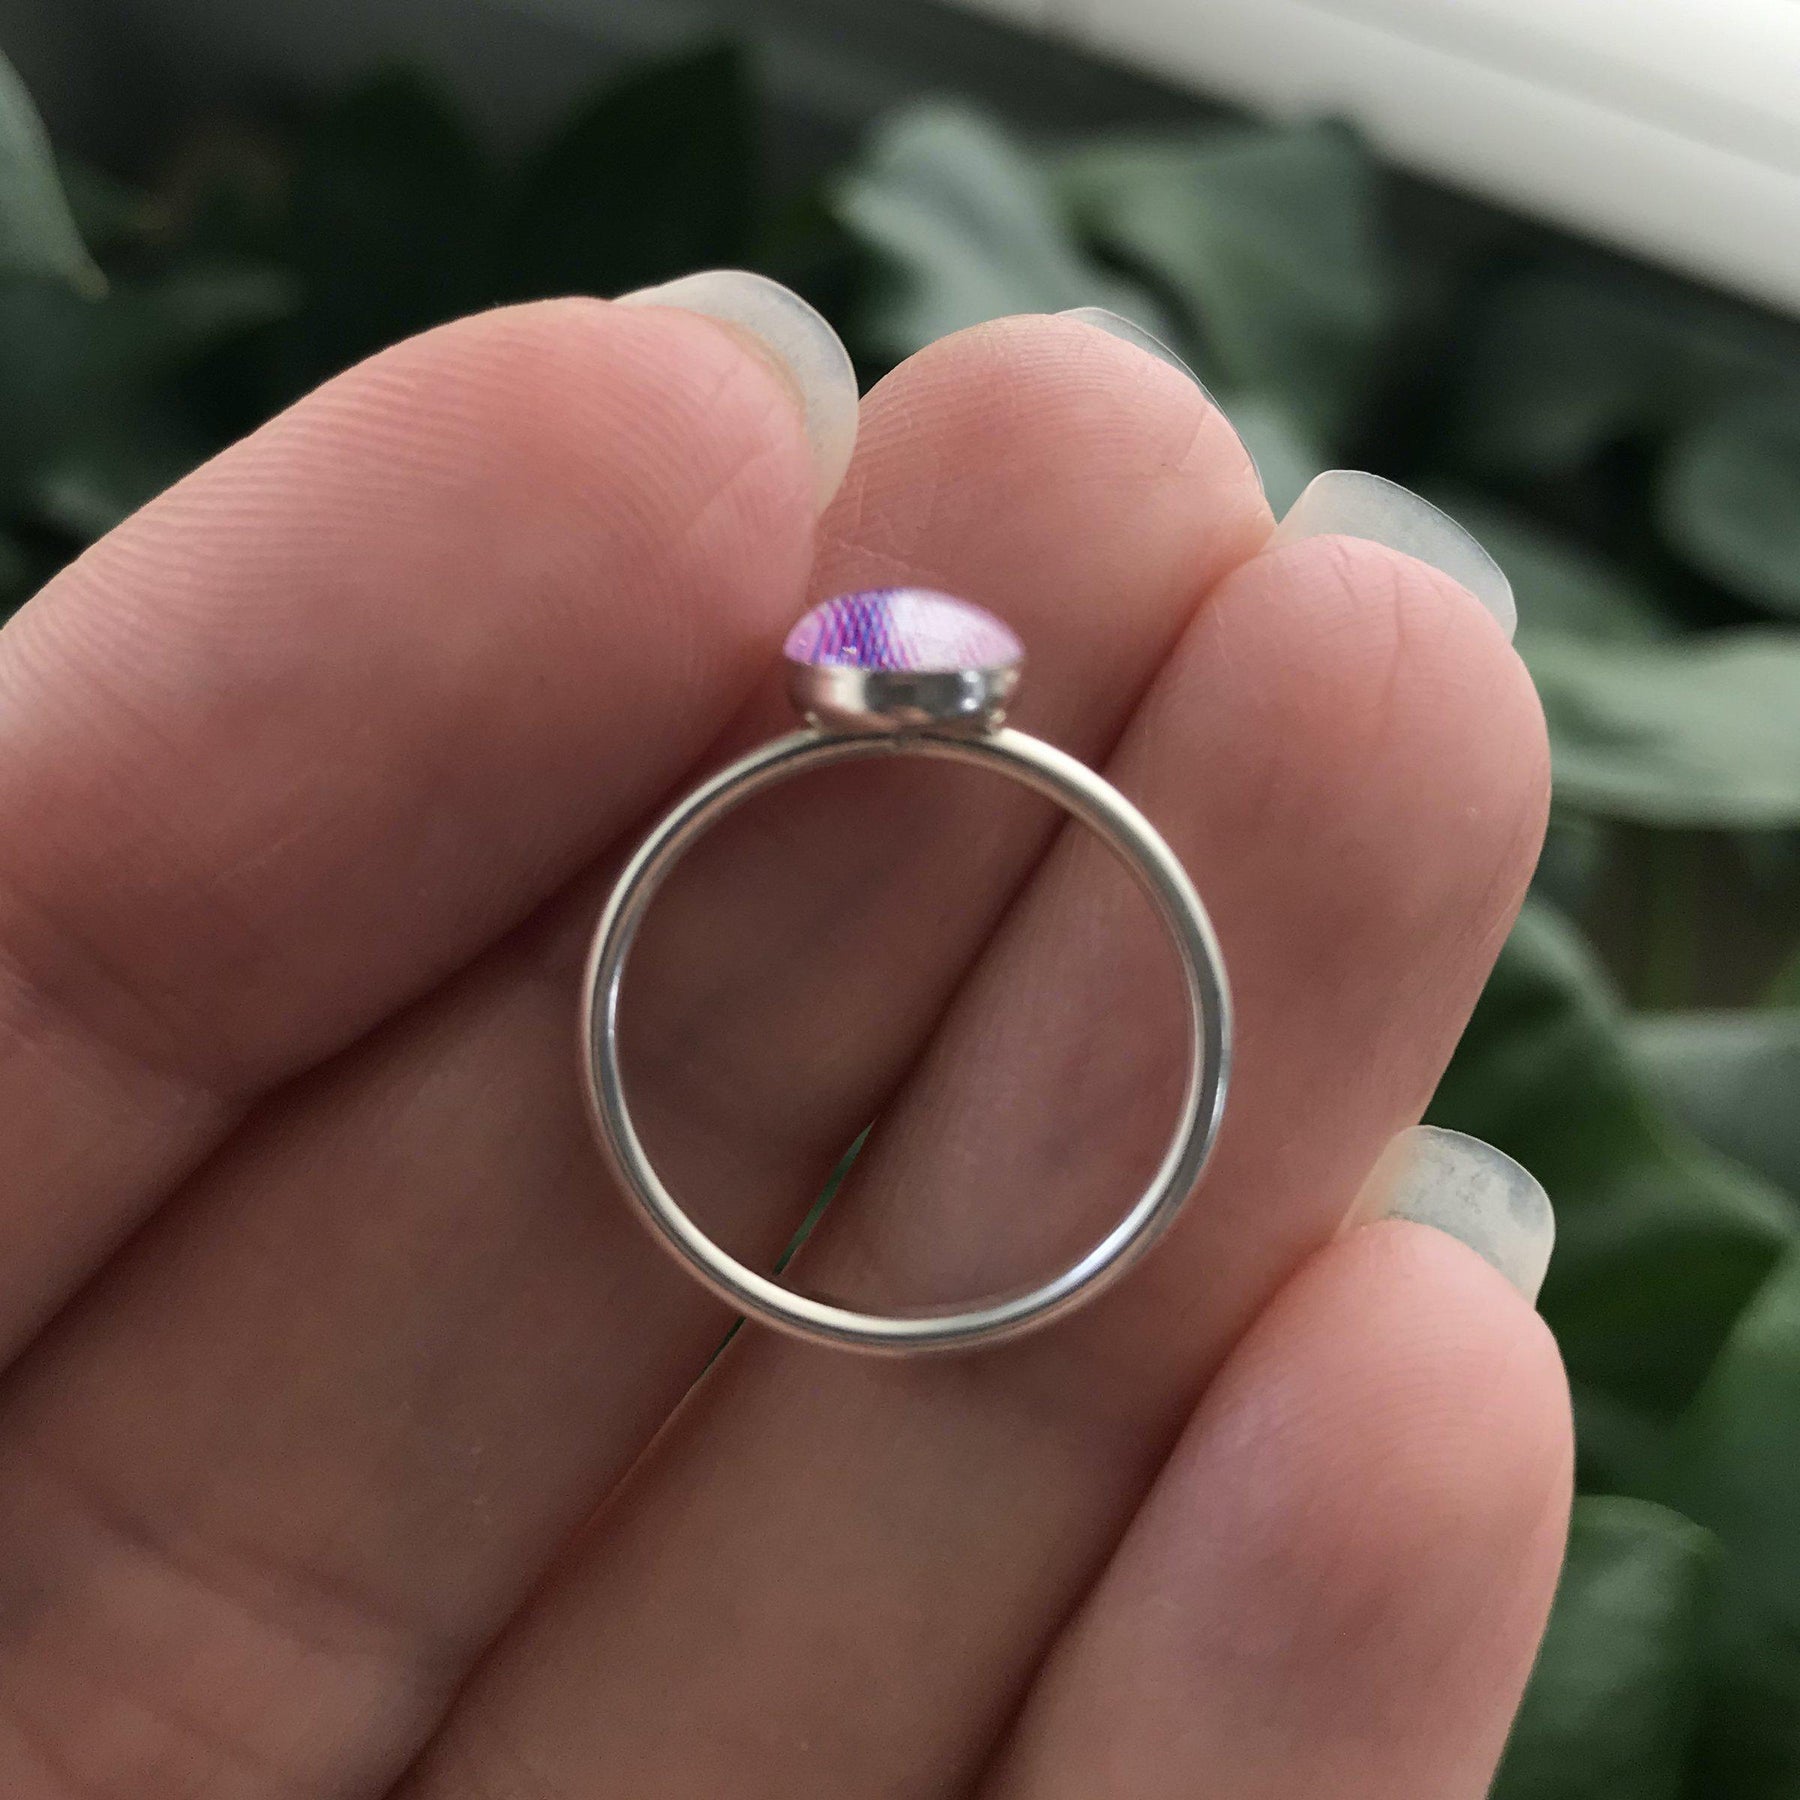 Support Lupus Research – Jewelry